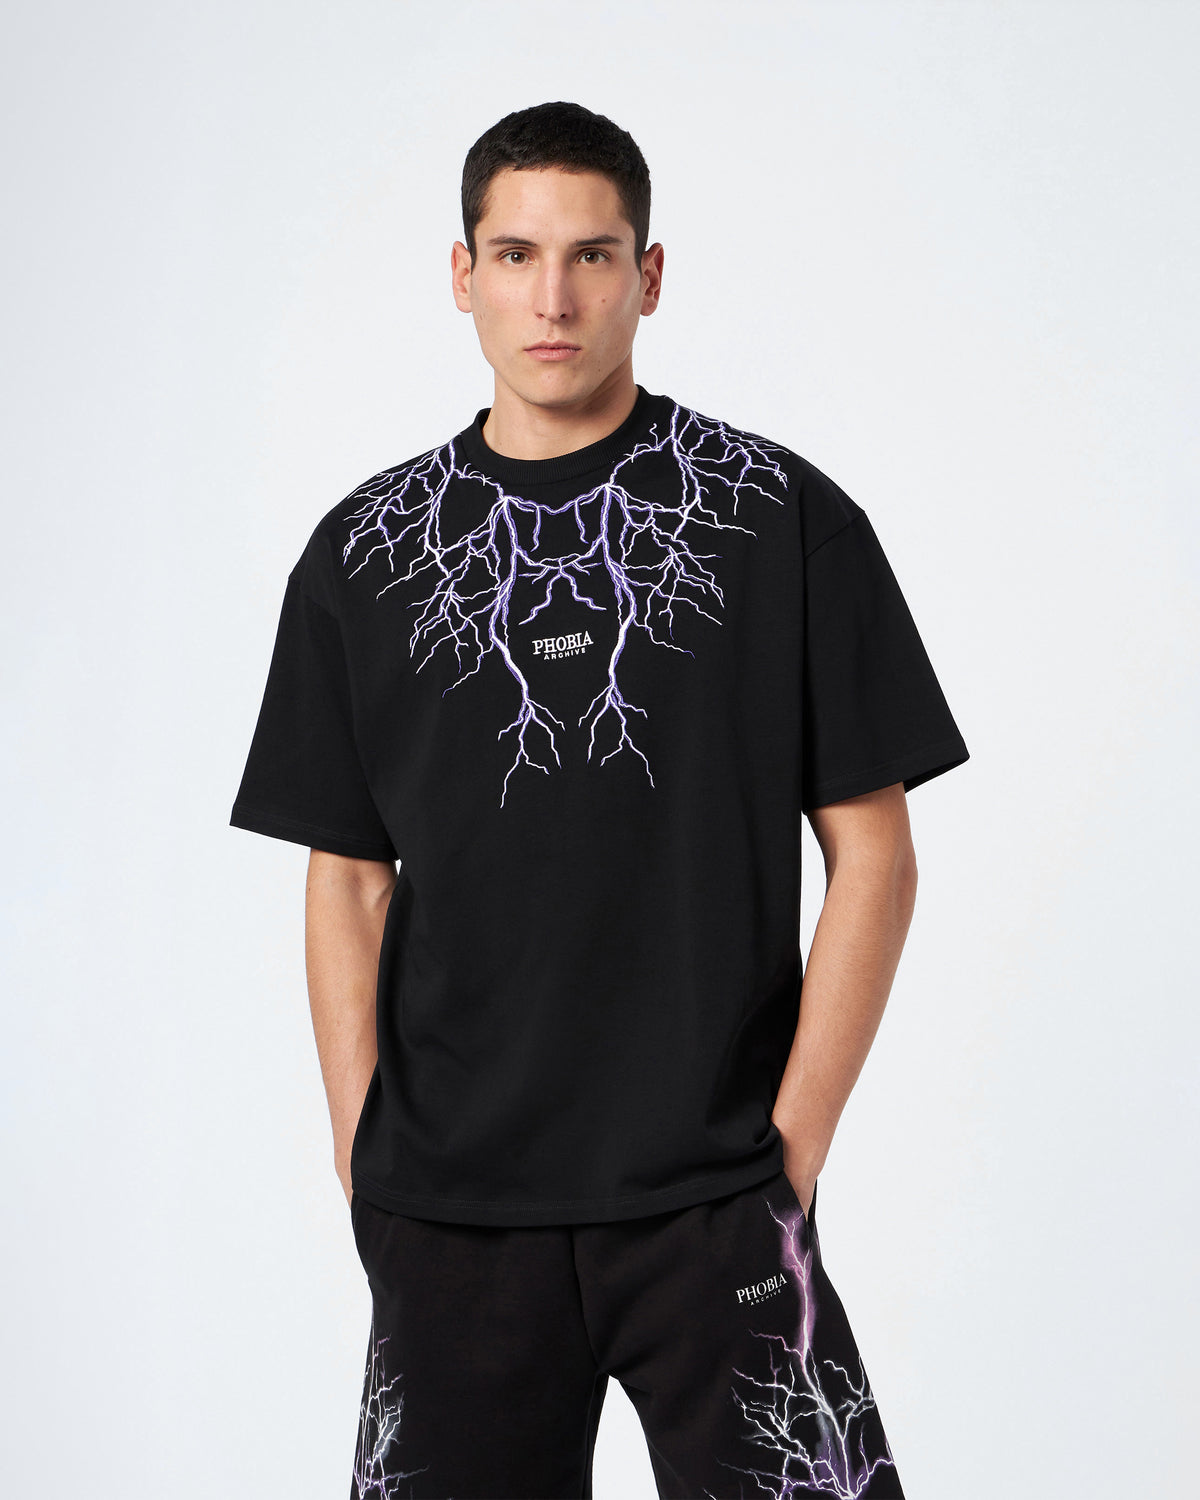 PHOBIA BLACK T-SHIRT WITH PURPLE EMBROIDERY LIGHTNING